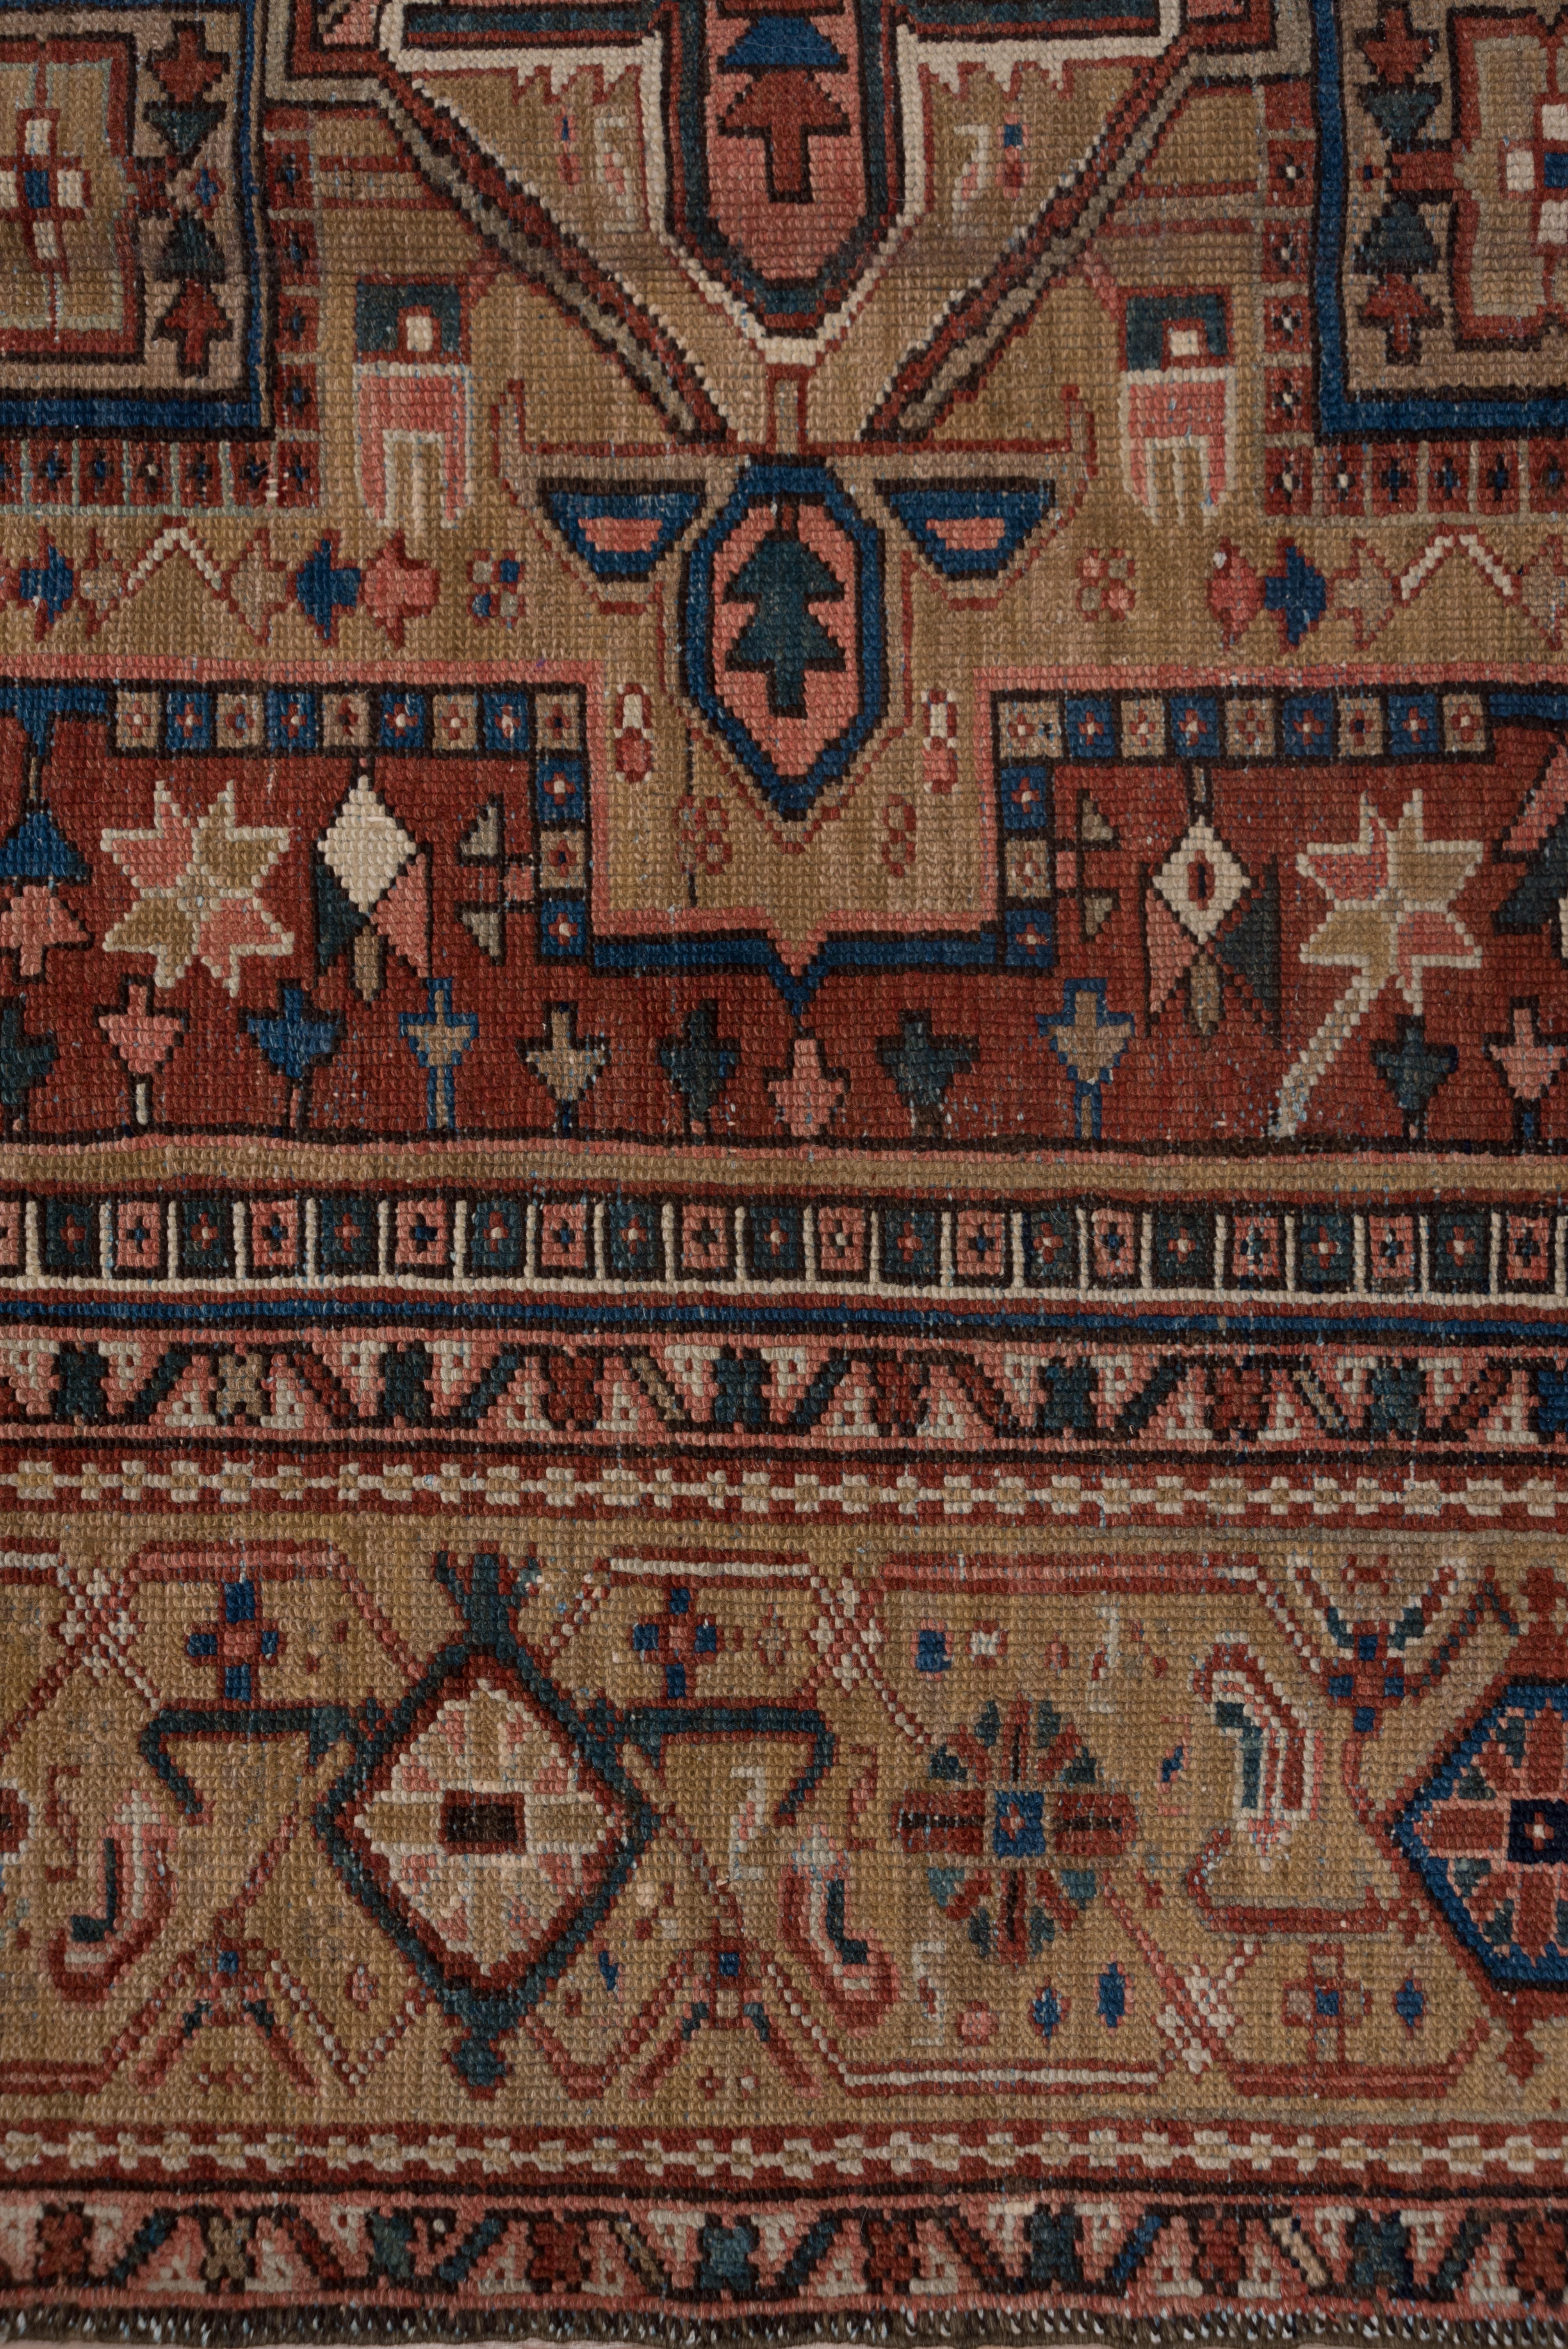 A single-wefted carpet with a Classic pendanted octogramme mustard medallion on a red, stepped Sub field and middle blue field manifested in the geometric flower corners. The mustard border features the simplest of widely spaced turtle palmettes.